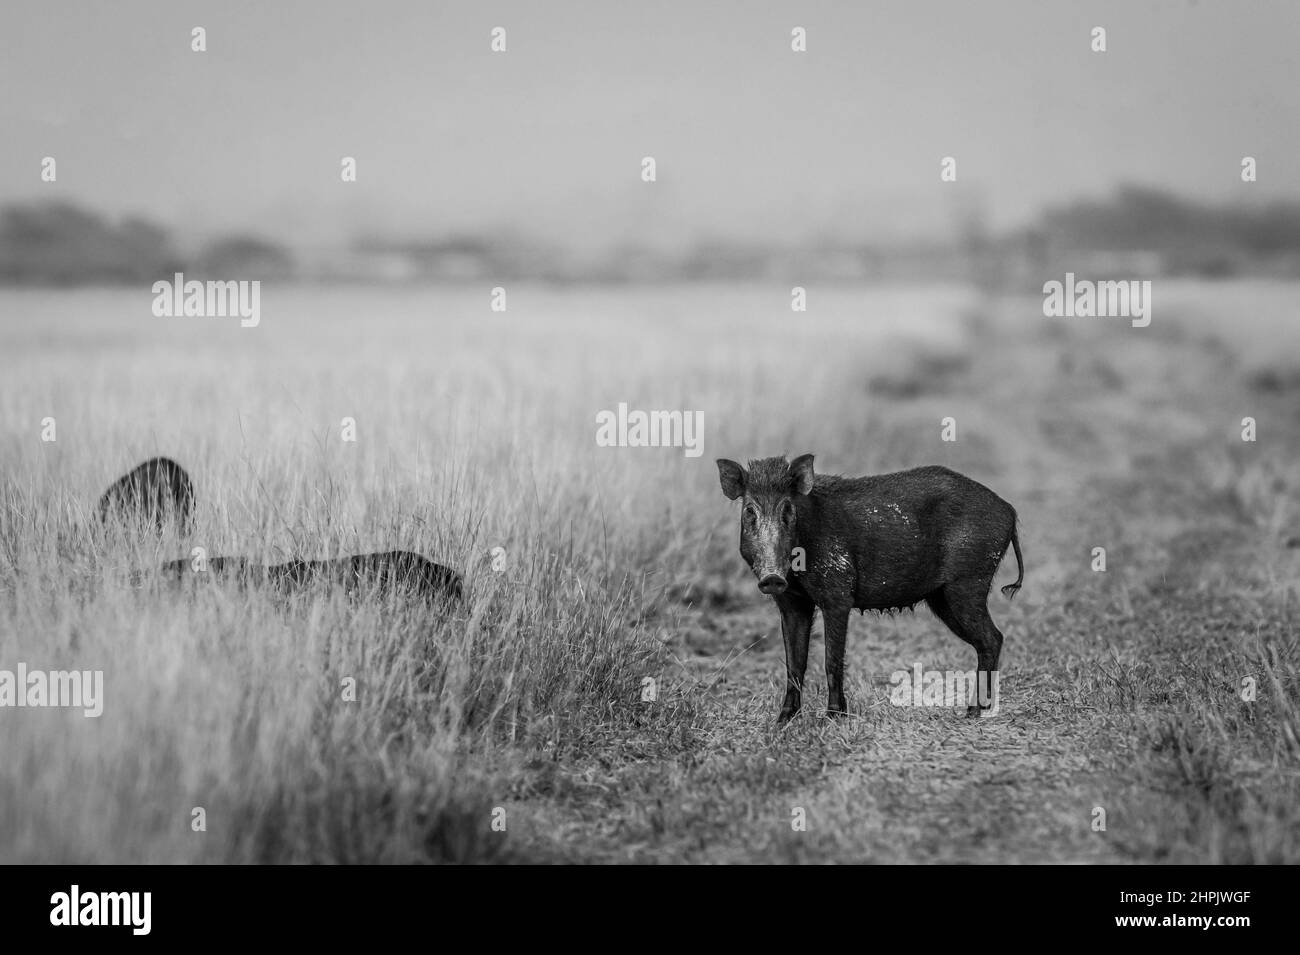 Indian boar or Andamanese or Moupin pig or wild boar animal with eye contact in black and white background of forest of central india - Sus scrofa Stock Photo